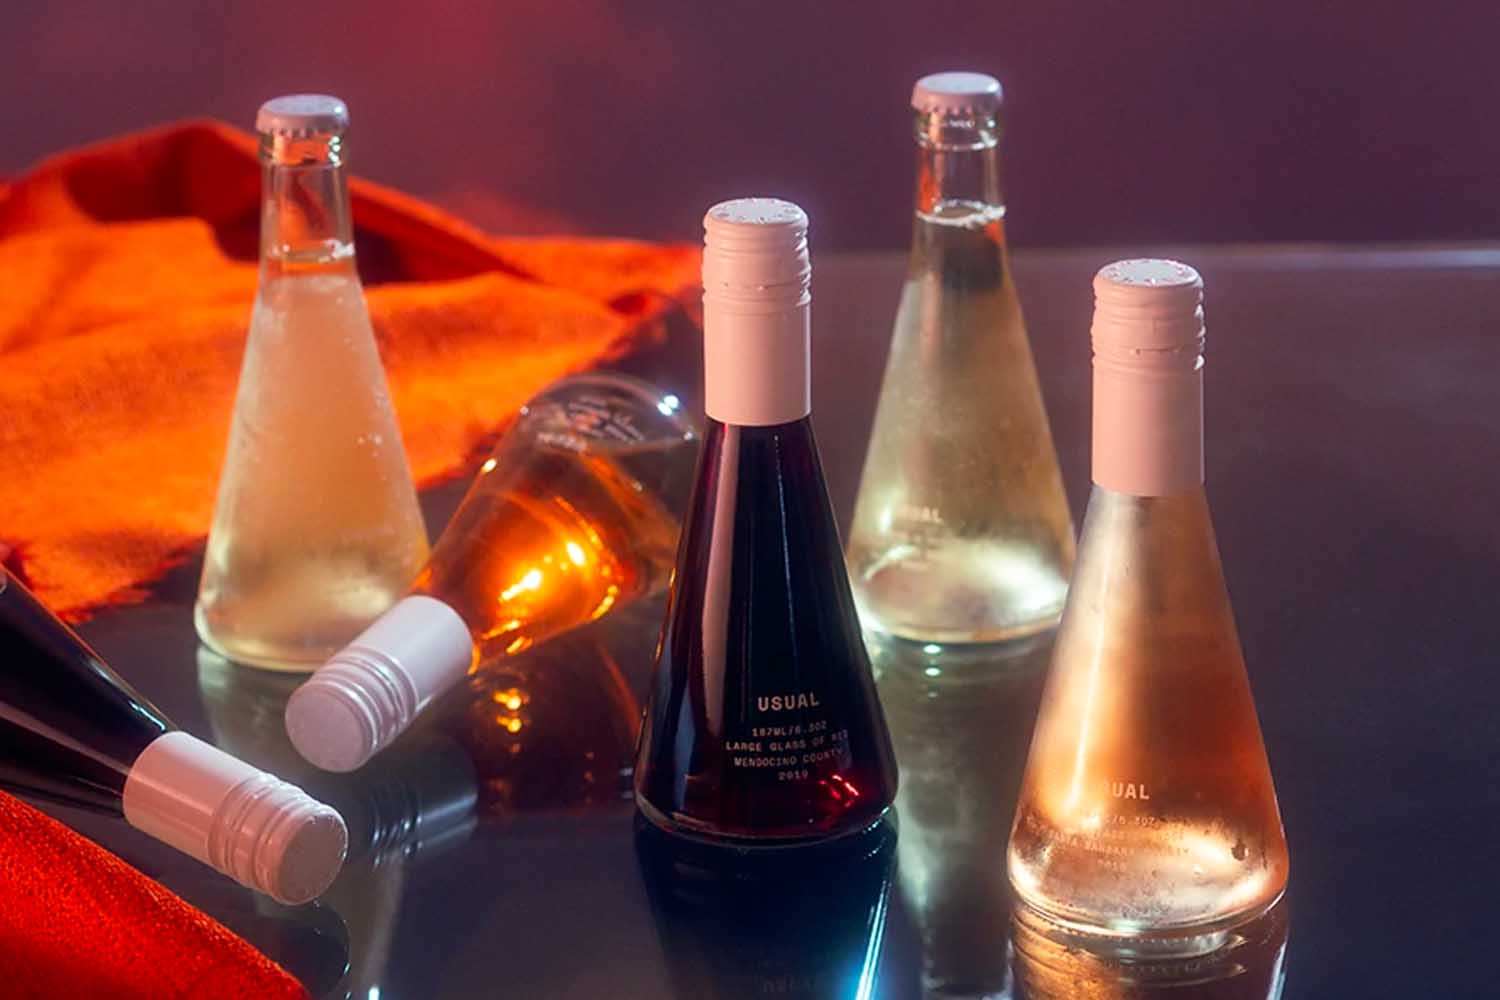 Six wine bottles from Usual Wines, a perfect Valentine’s Day gift for 2022. 